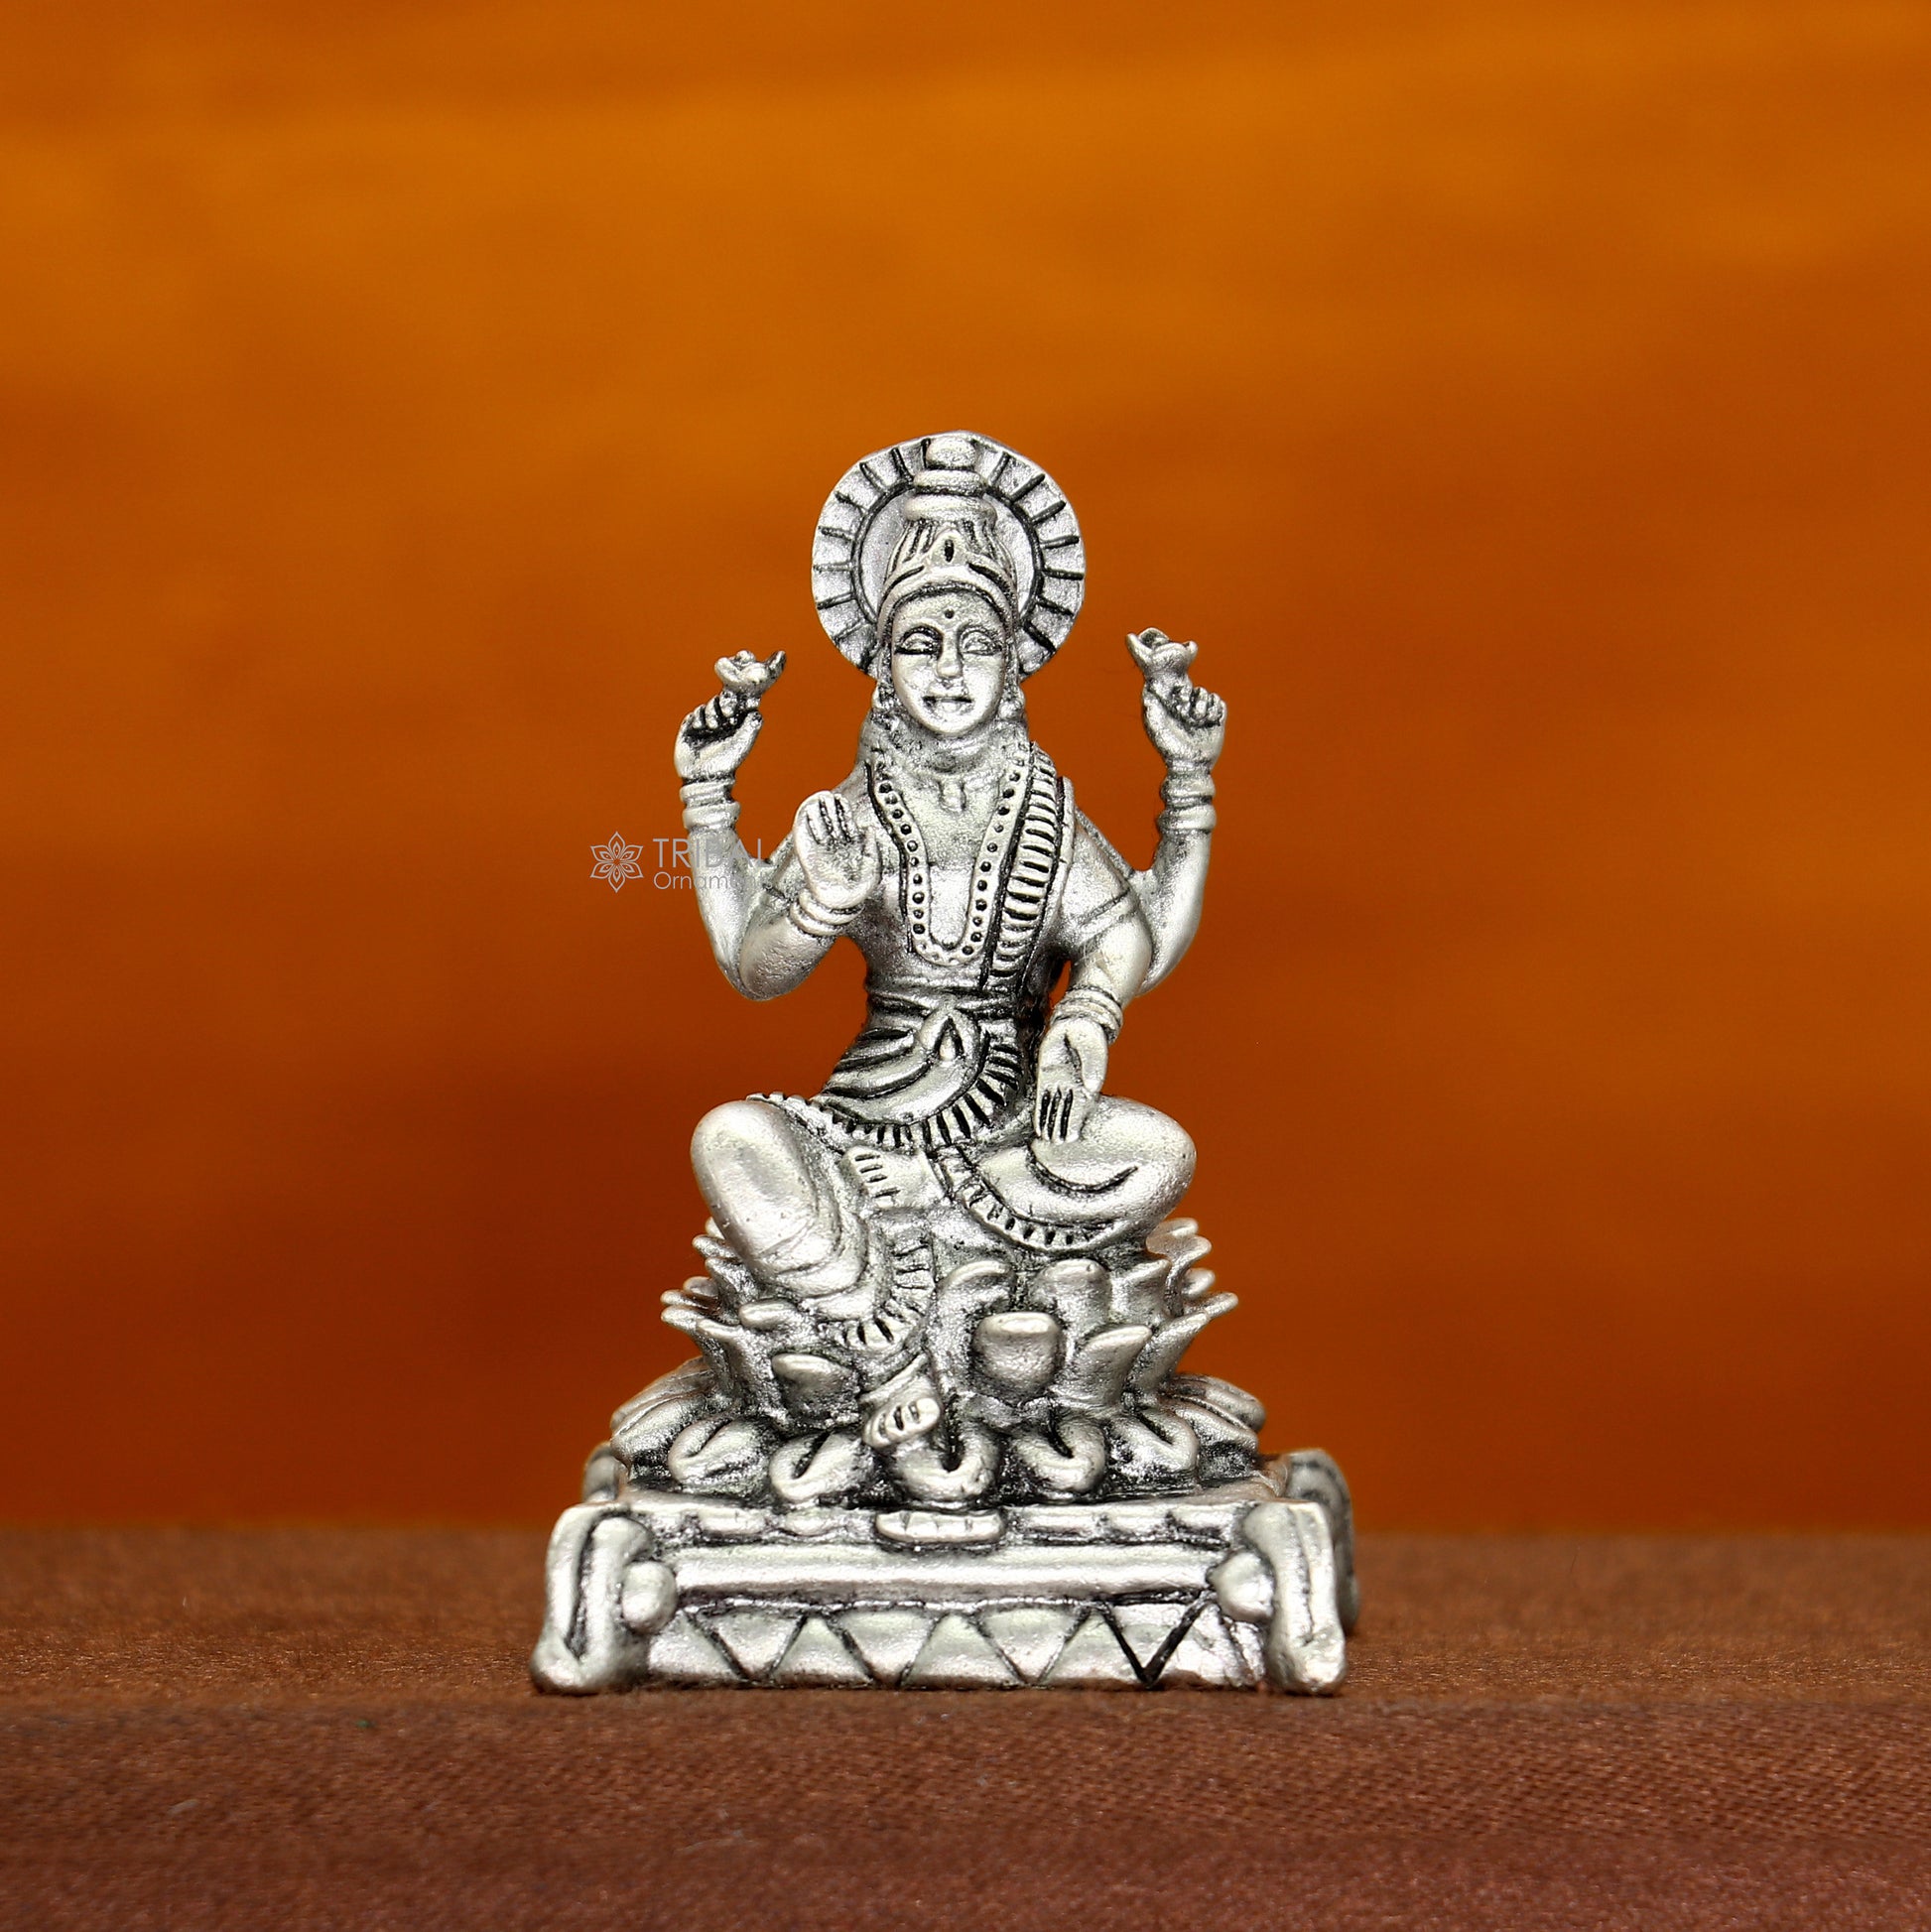 2" Goddess Lakshmi Divine statue figurine for puja,best way for Diwali festival puja or worshipping for wealth and prosperity art694 - TRIBAL ORNAMENTS